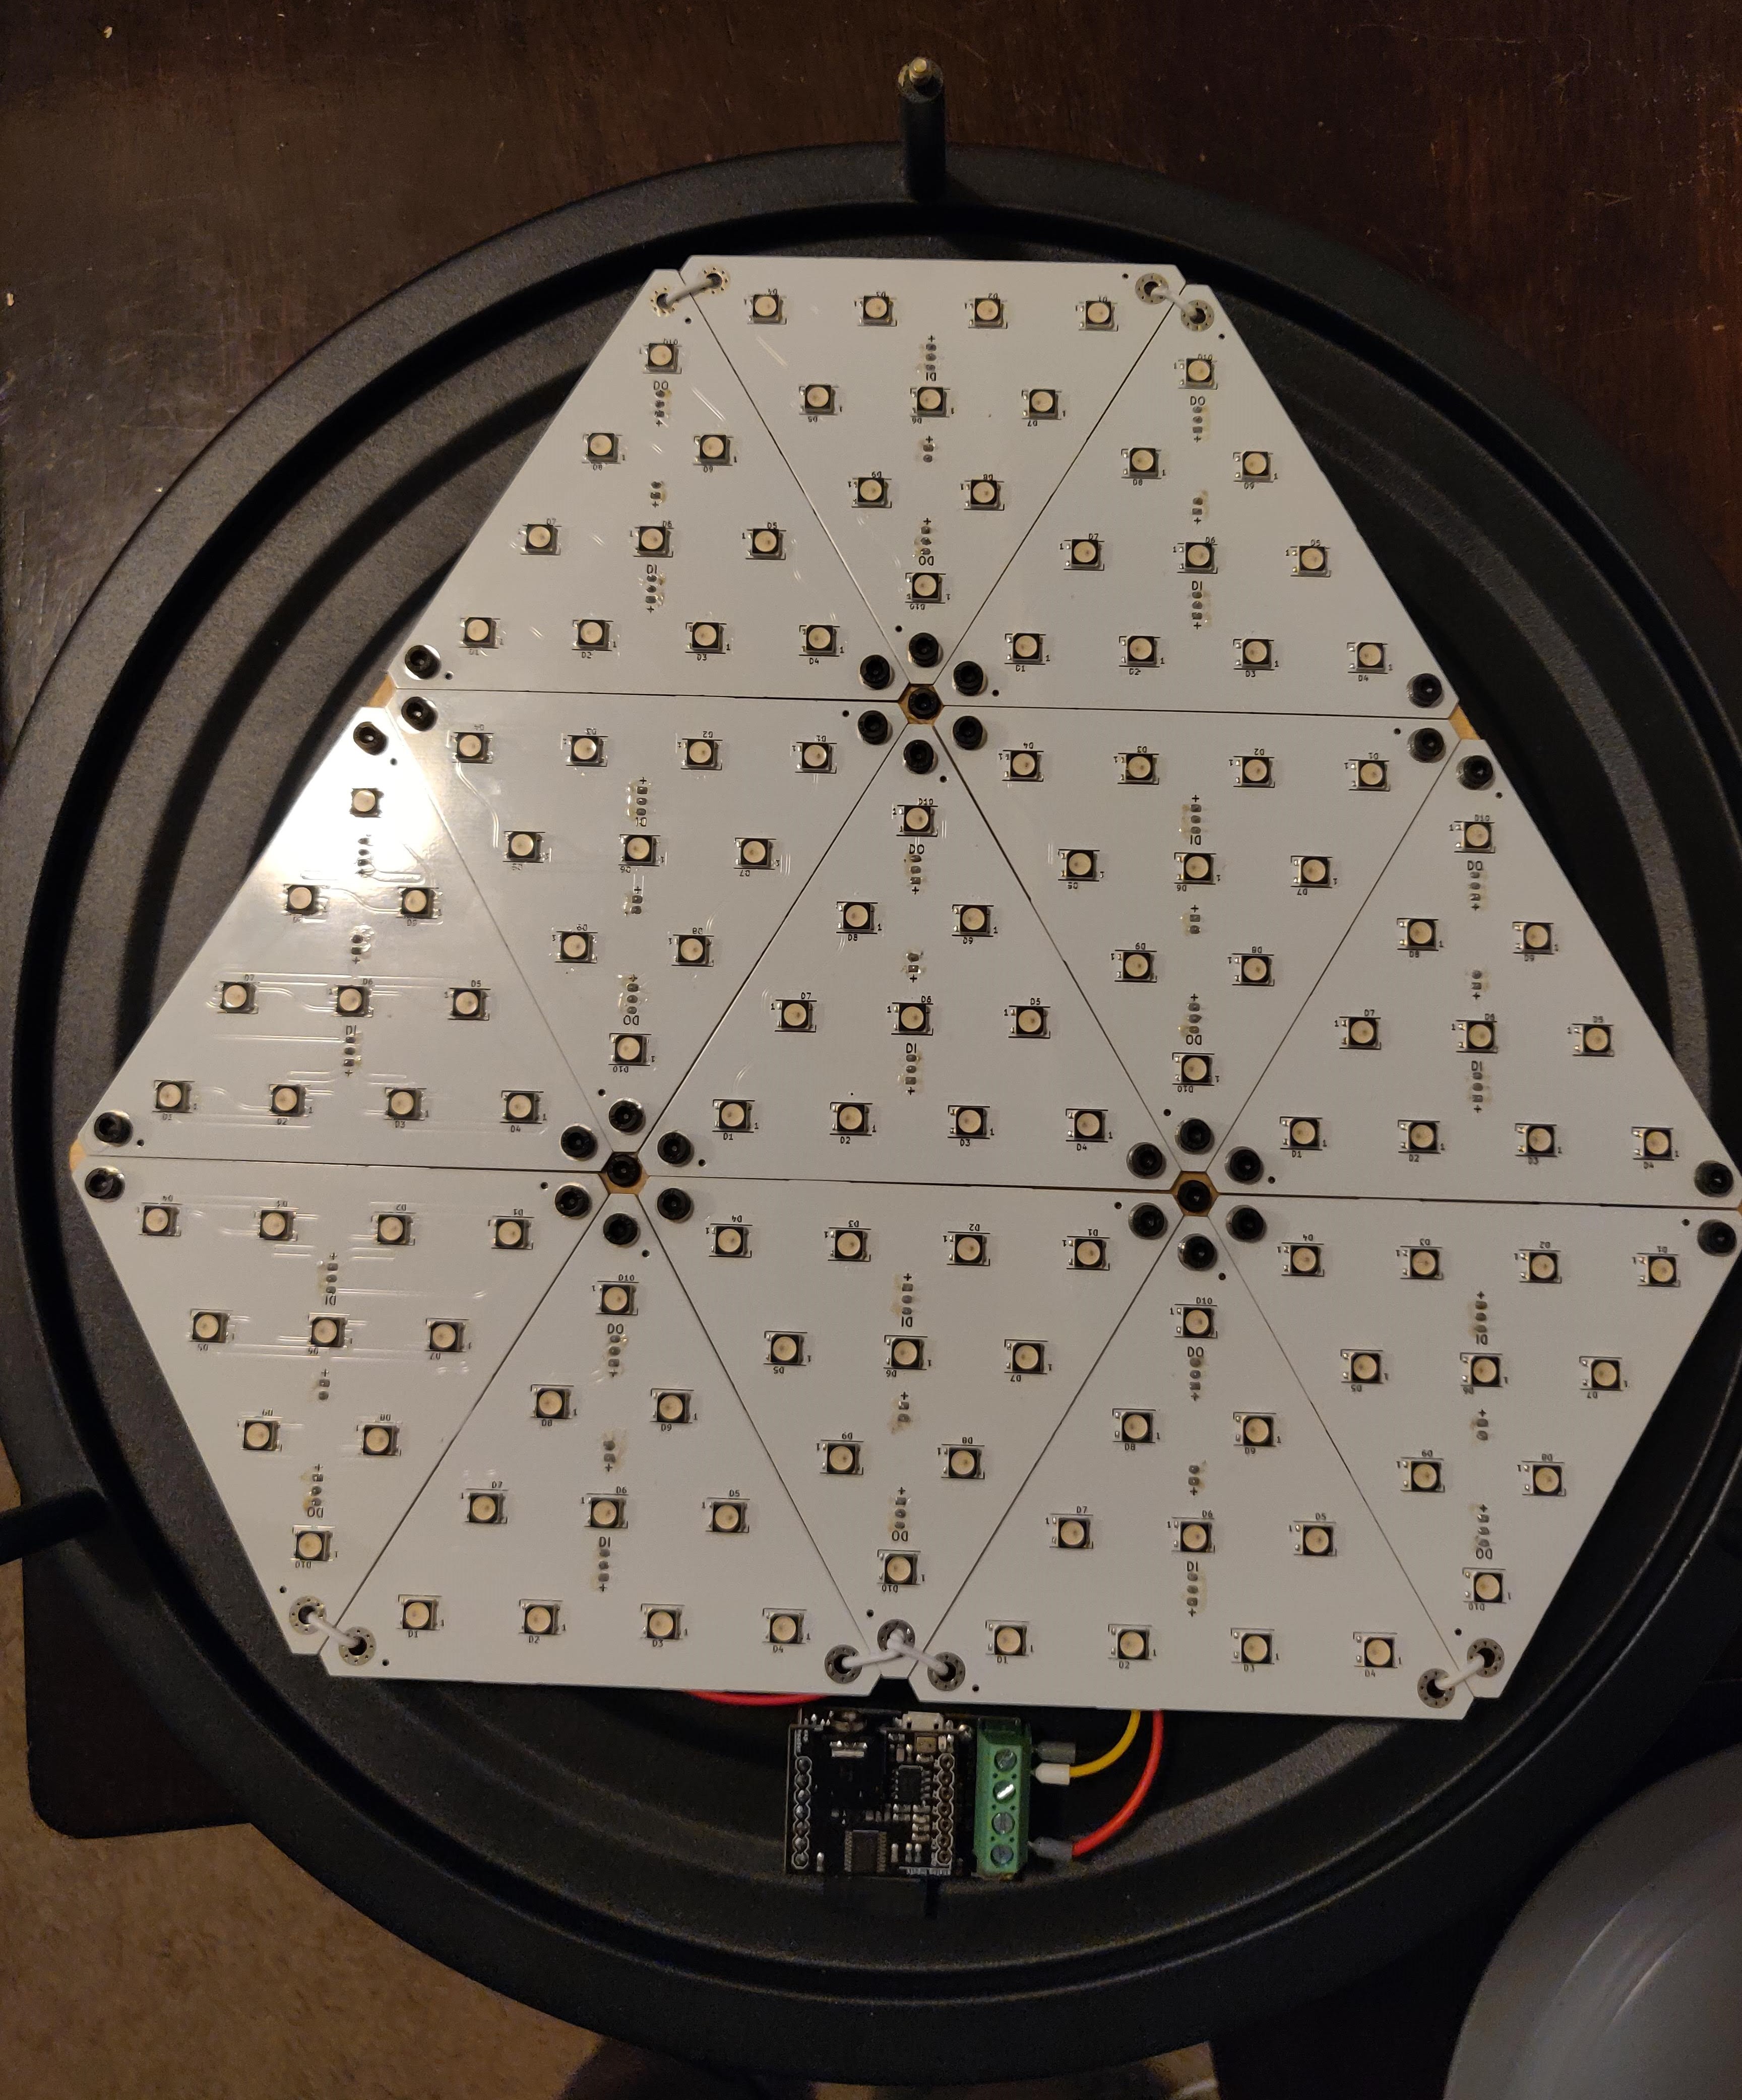 inside the large porthole - 13 LED triangles in a hexagonal array